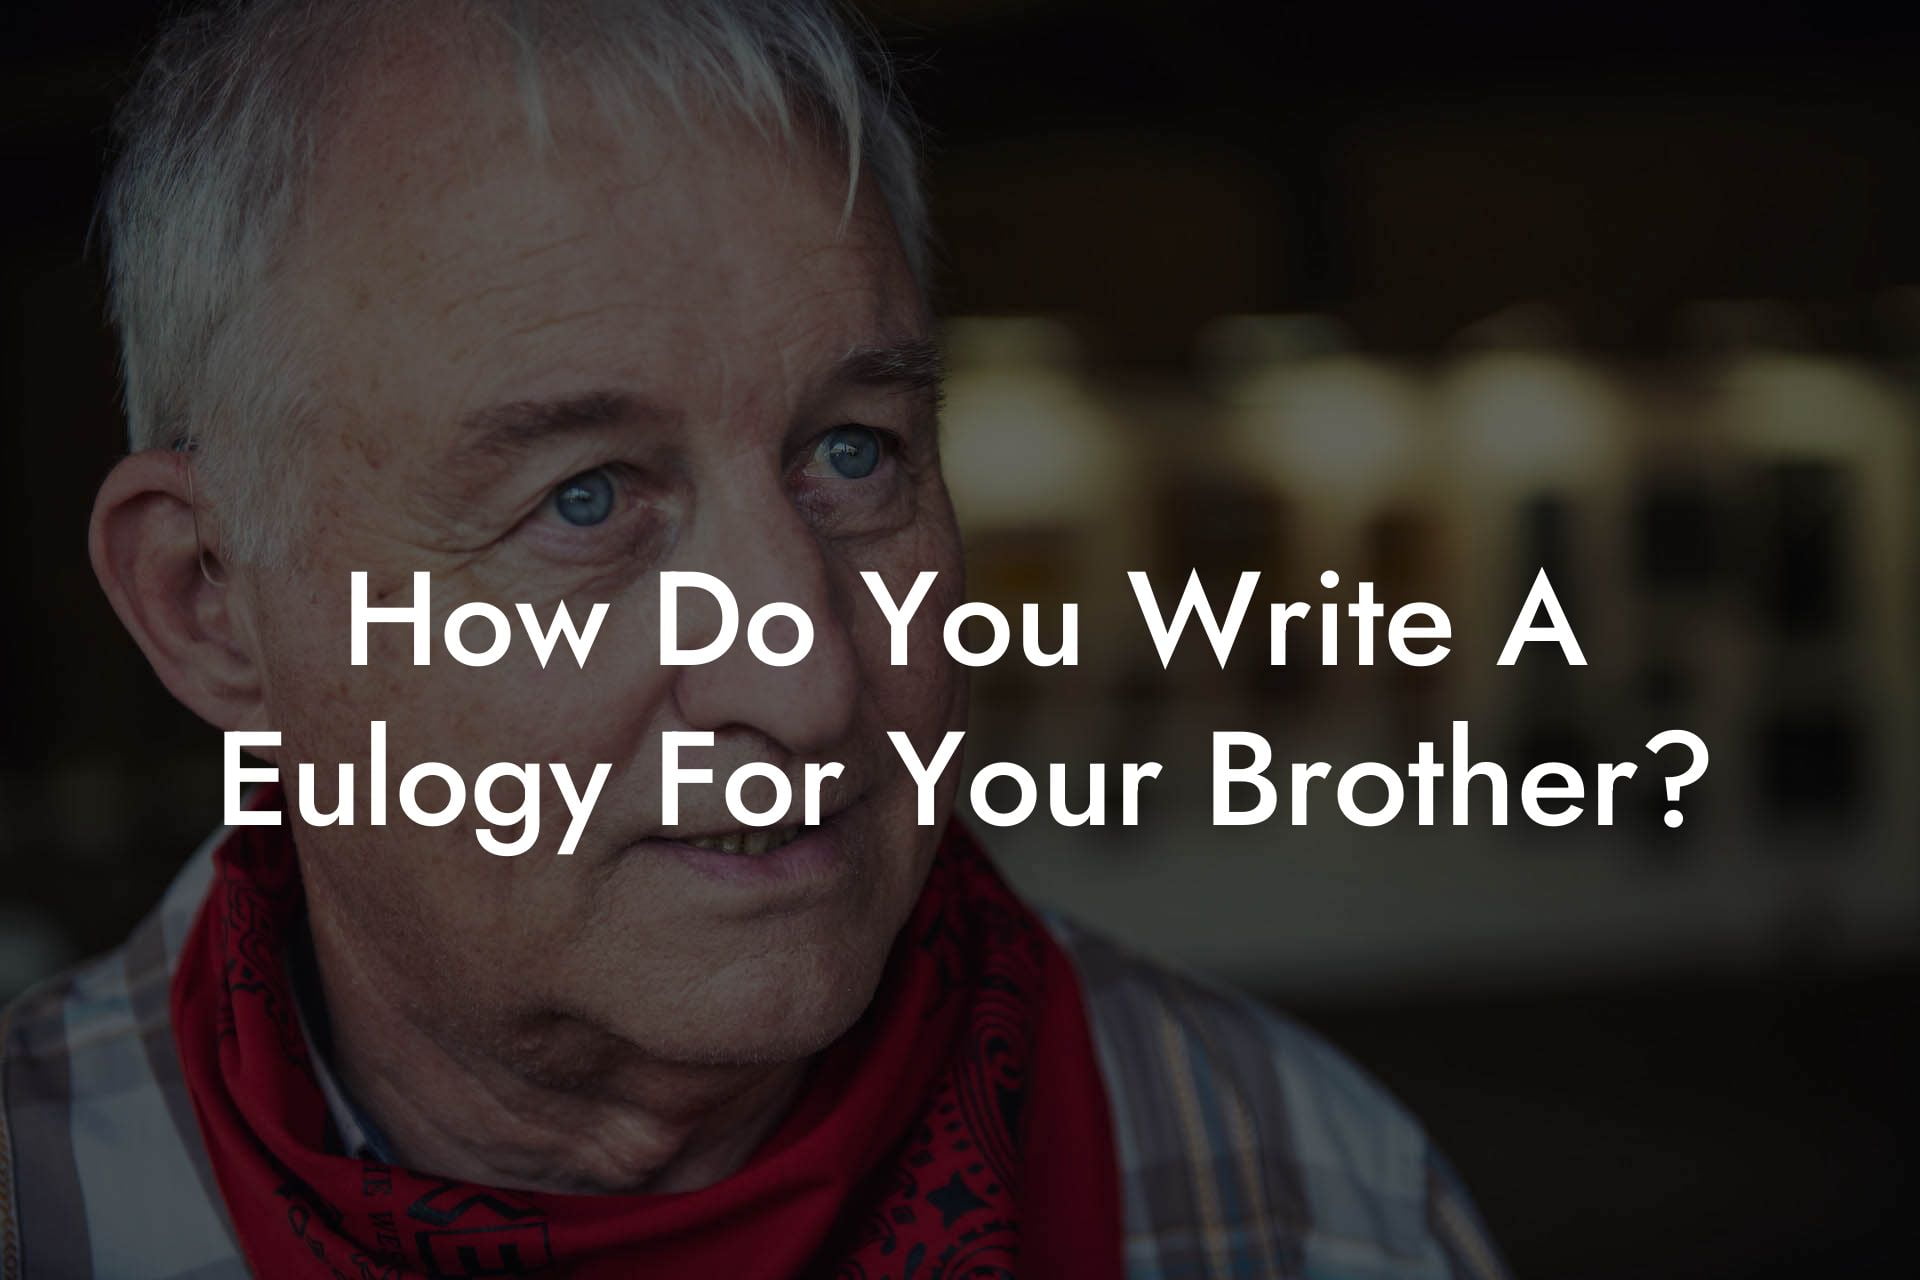 How Do You Write A Eulogy For Your Brother?